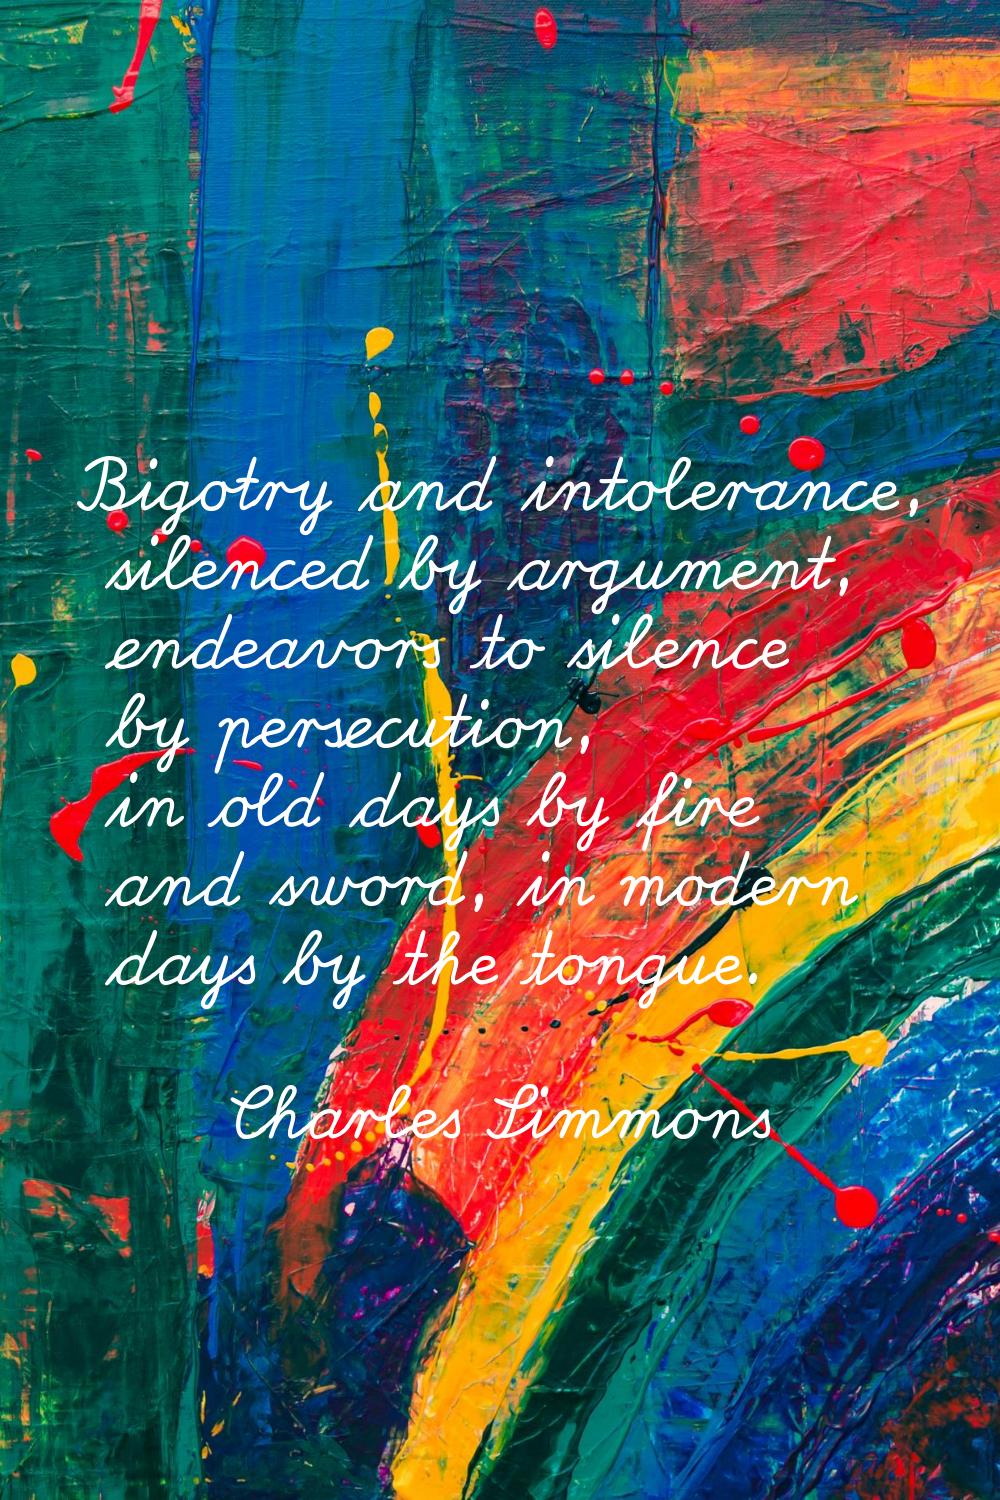 Bigotry and intolerance, silenced by argument, endeavors to silence by persecution, in old days by 